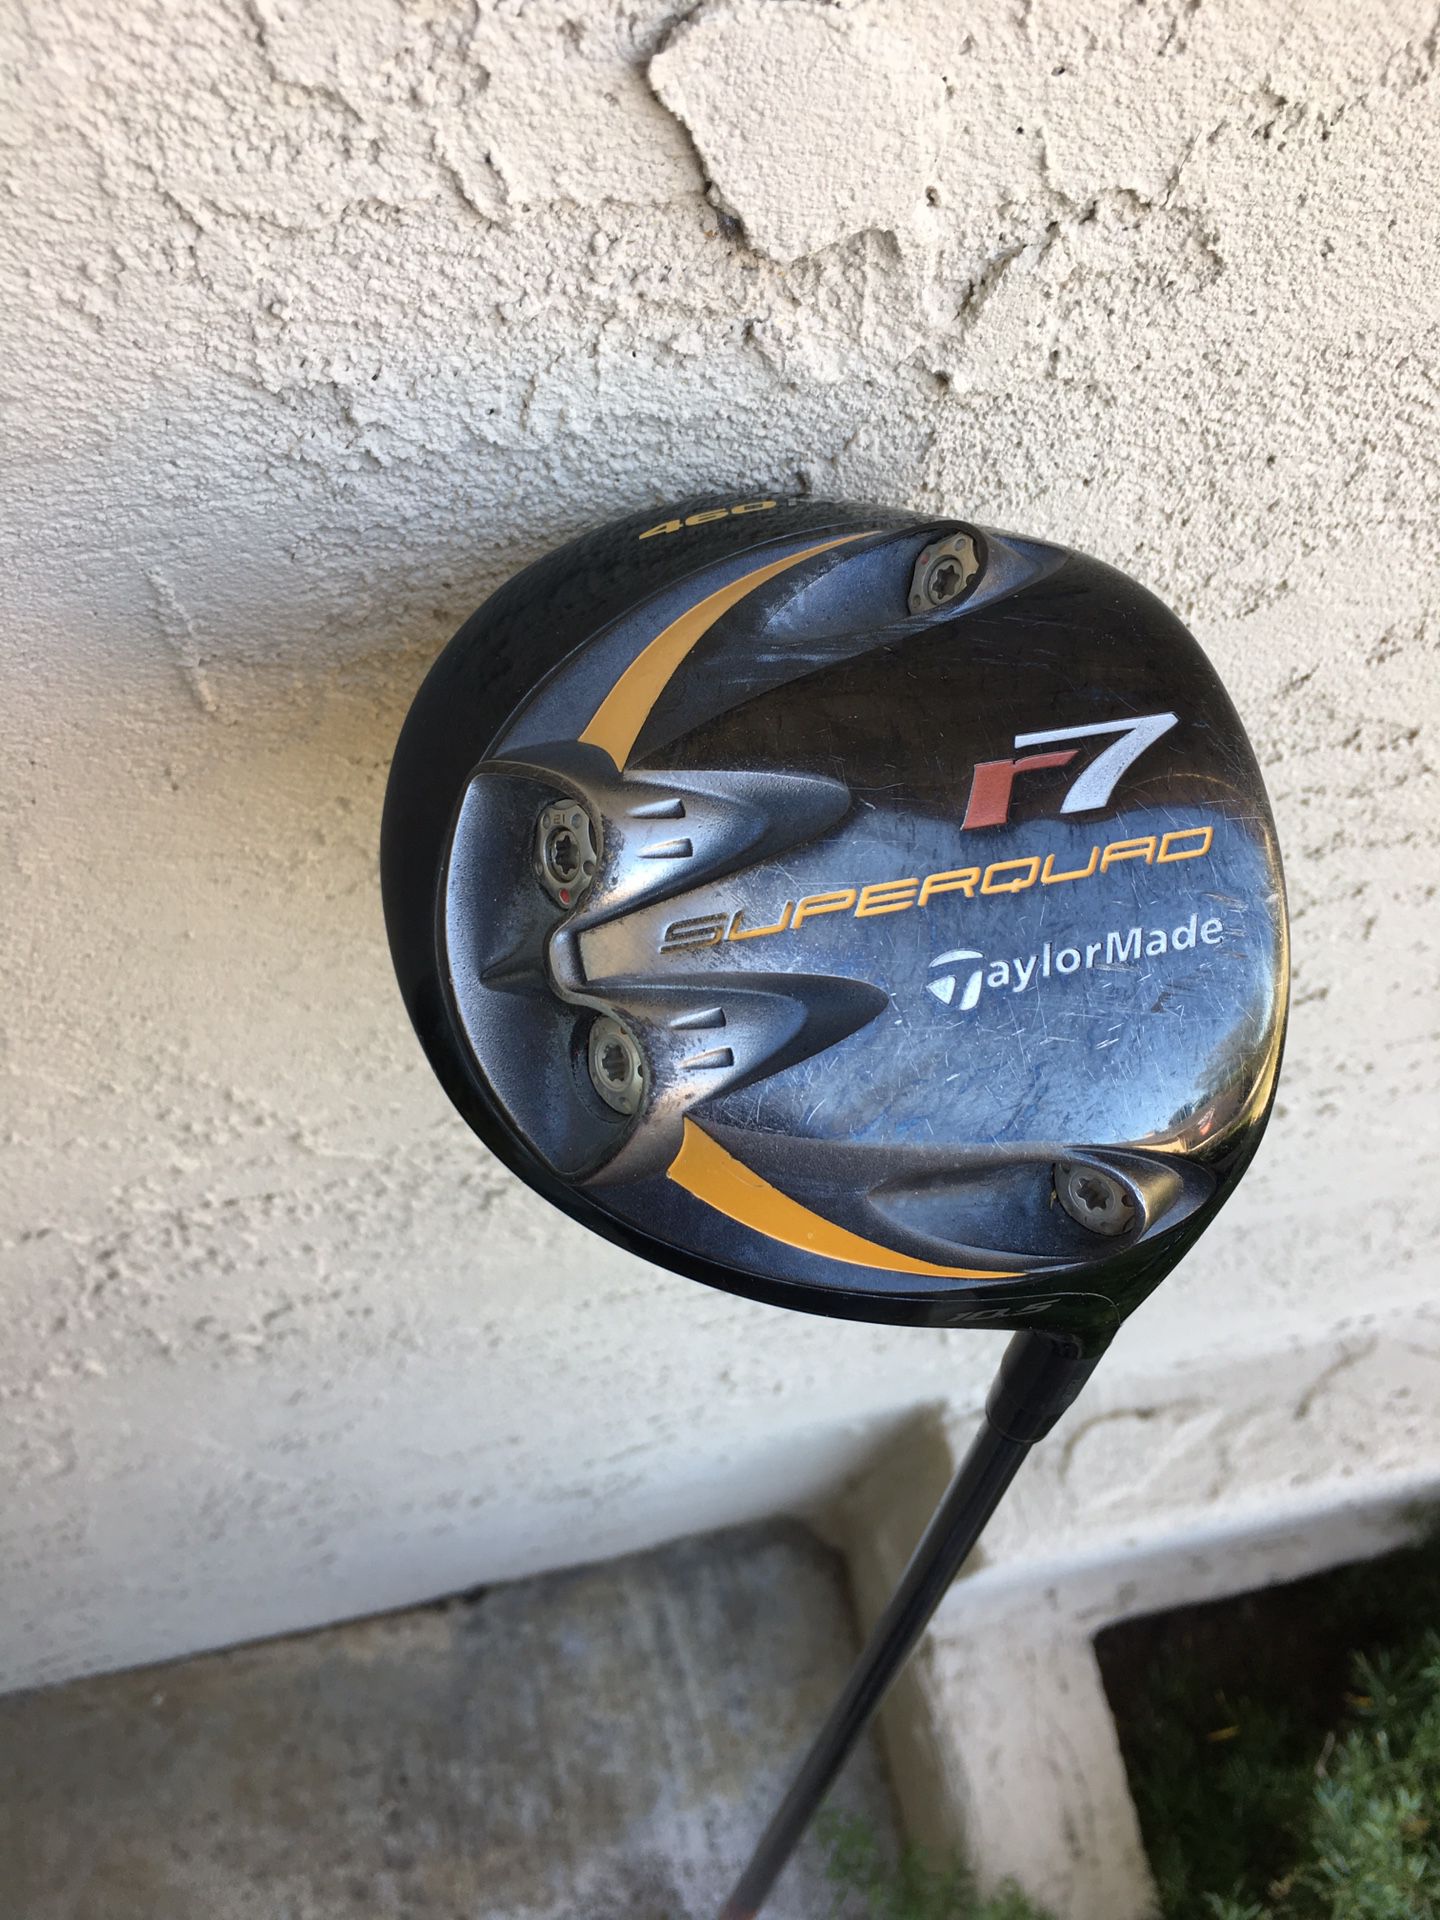 Taylormade golf r7 driver for Sale in San Jose, CA - OfferUp